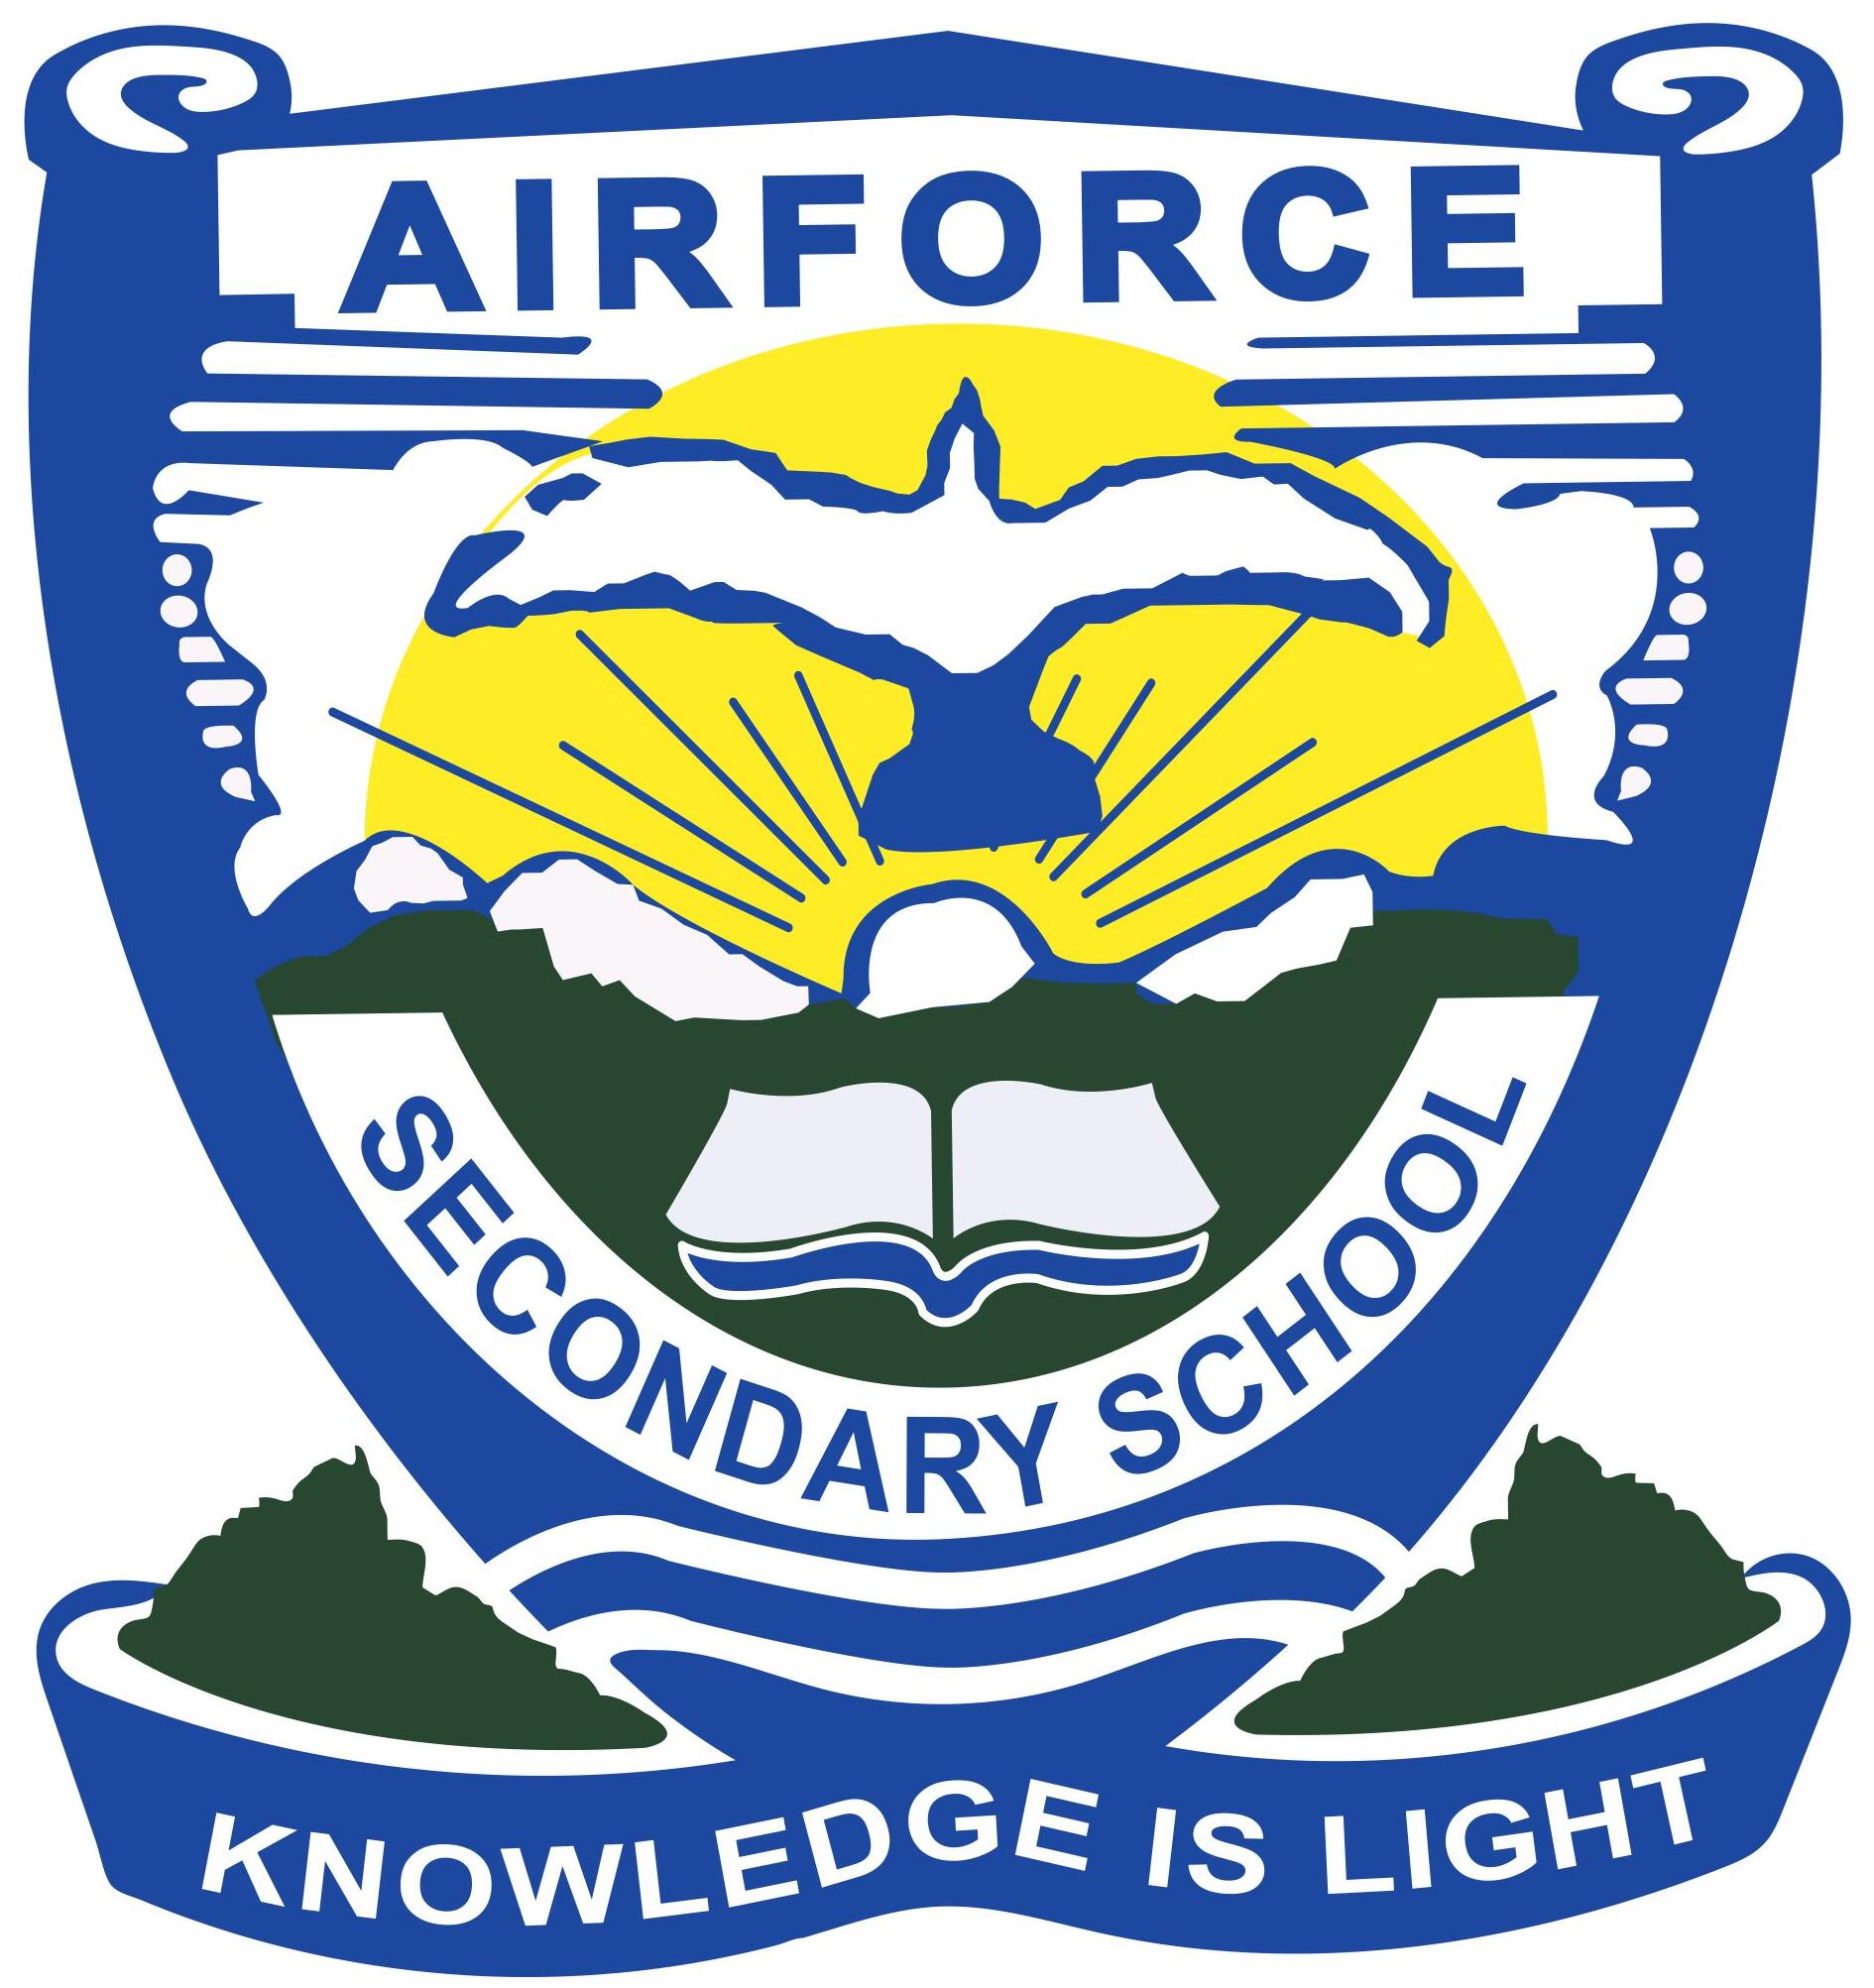 Airforce secondary school